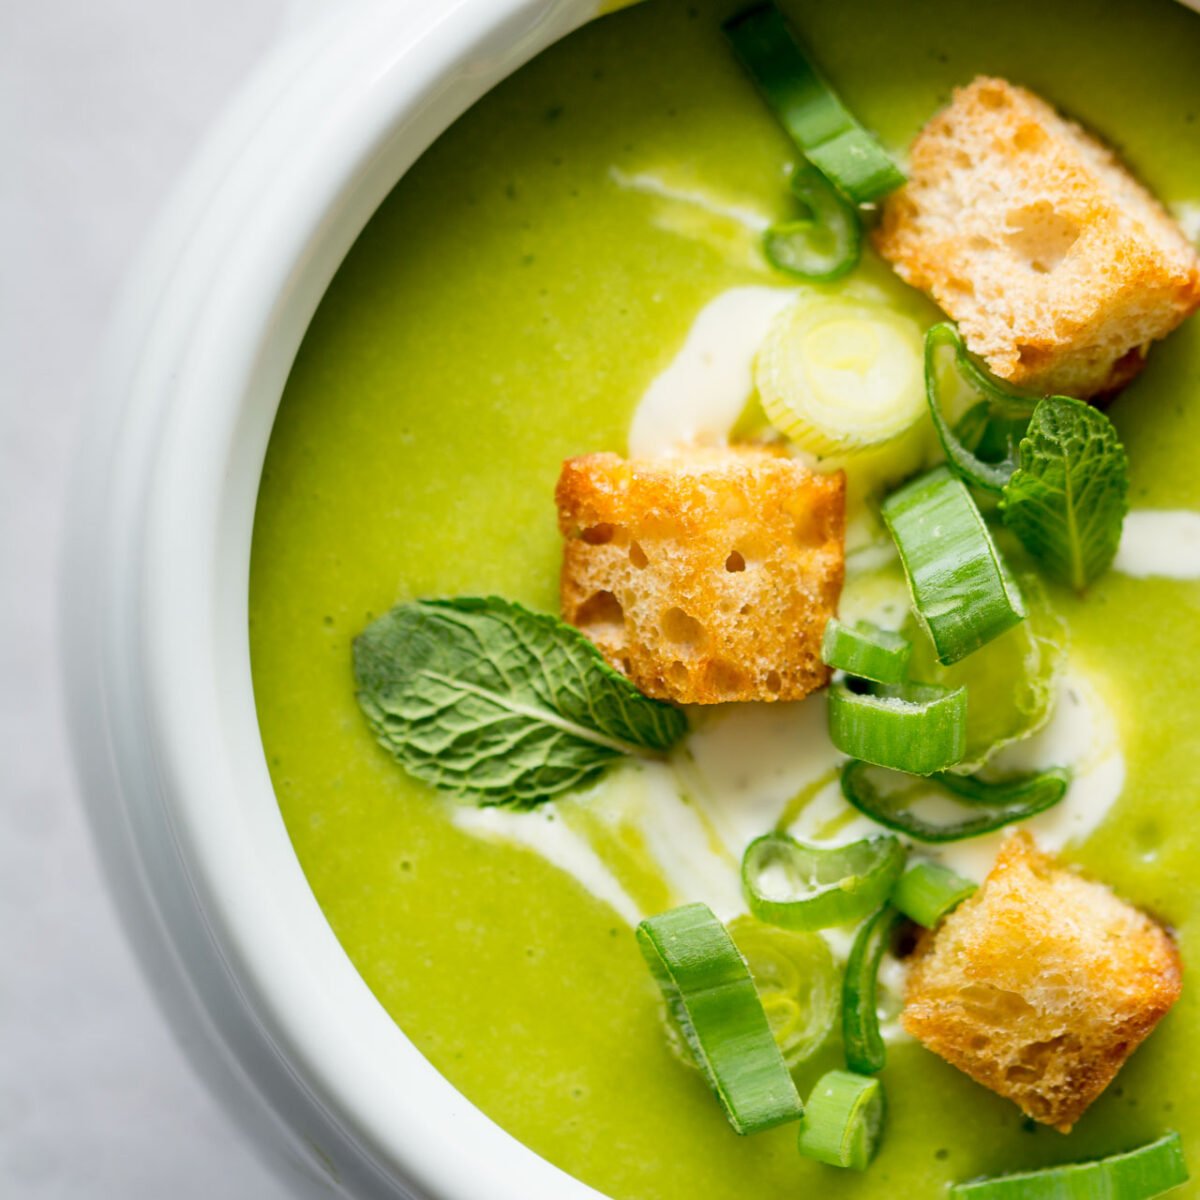 5 Ingredient Pea and Mint Soup and the launch of "The 5 Ingredient Dinner". Get your free copy now!